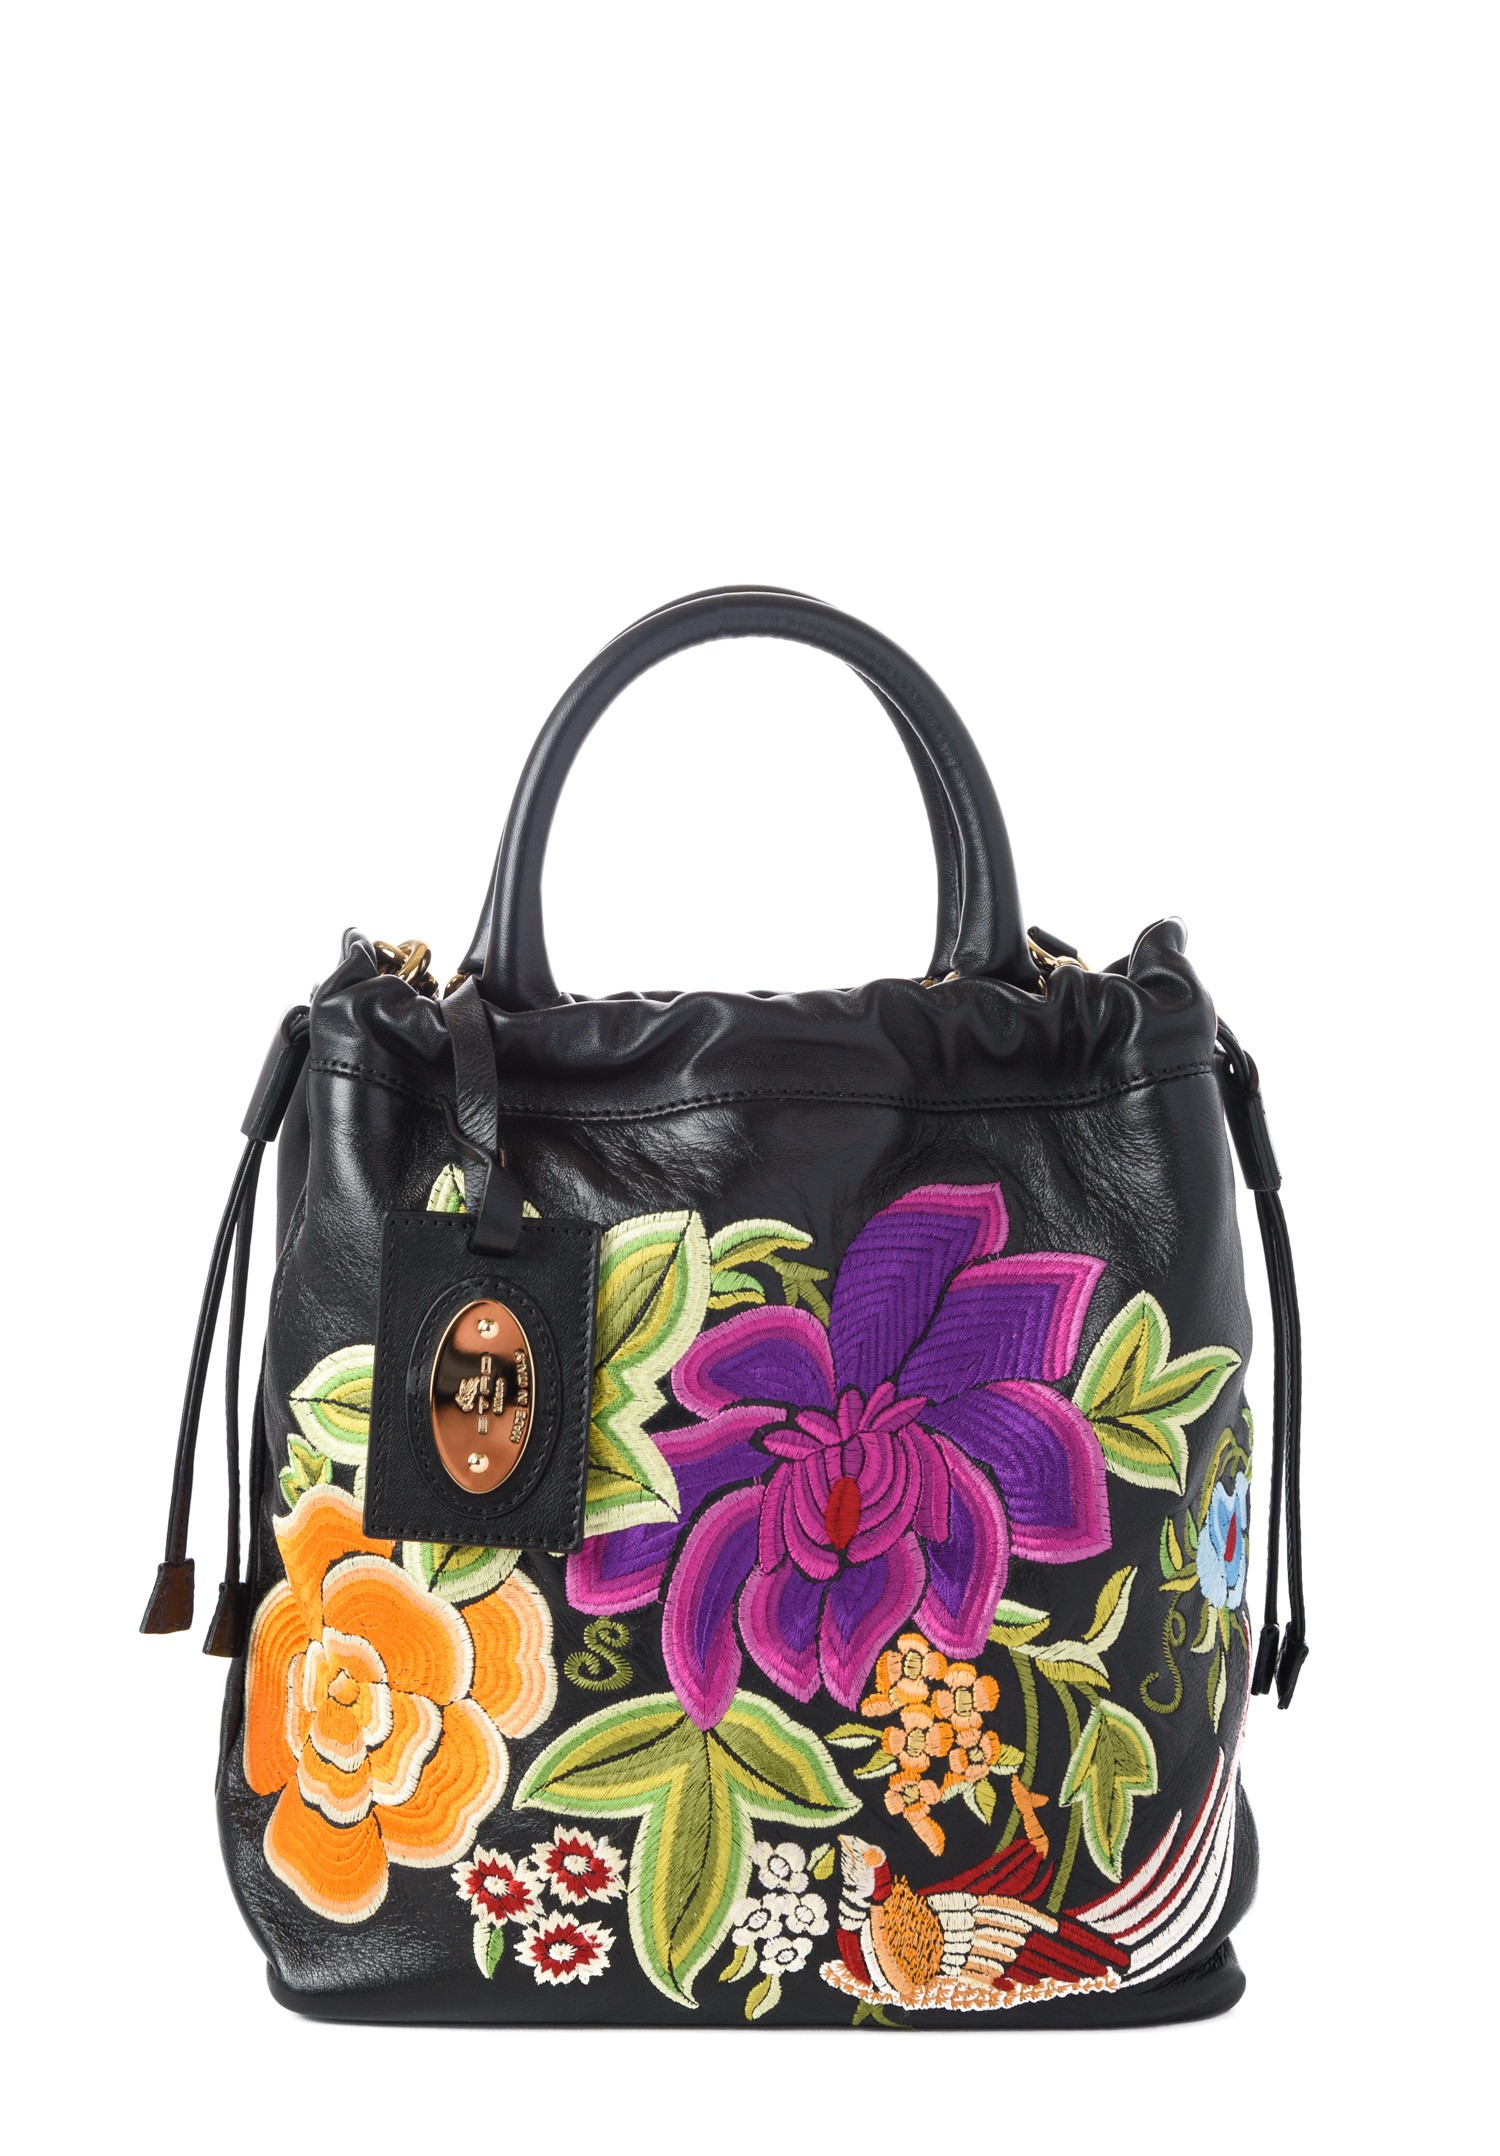 Etro Lambskin Floral Embroidered Bag in Black | Santa Fe Dry Goods ...